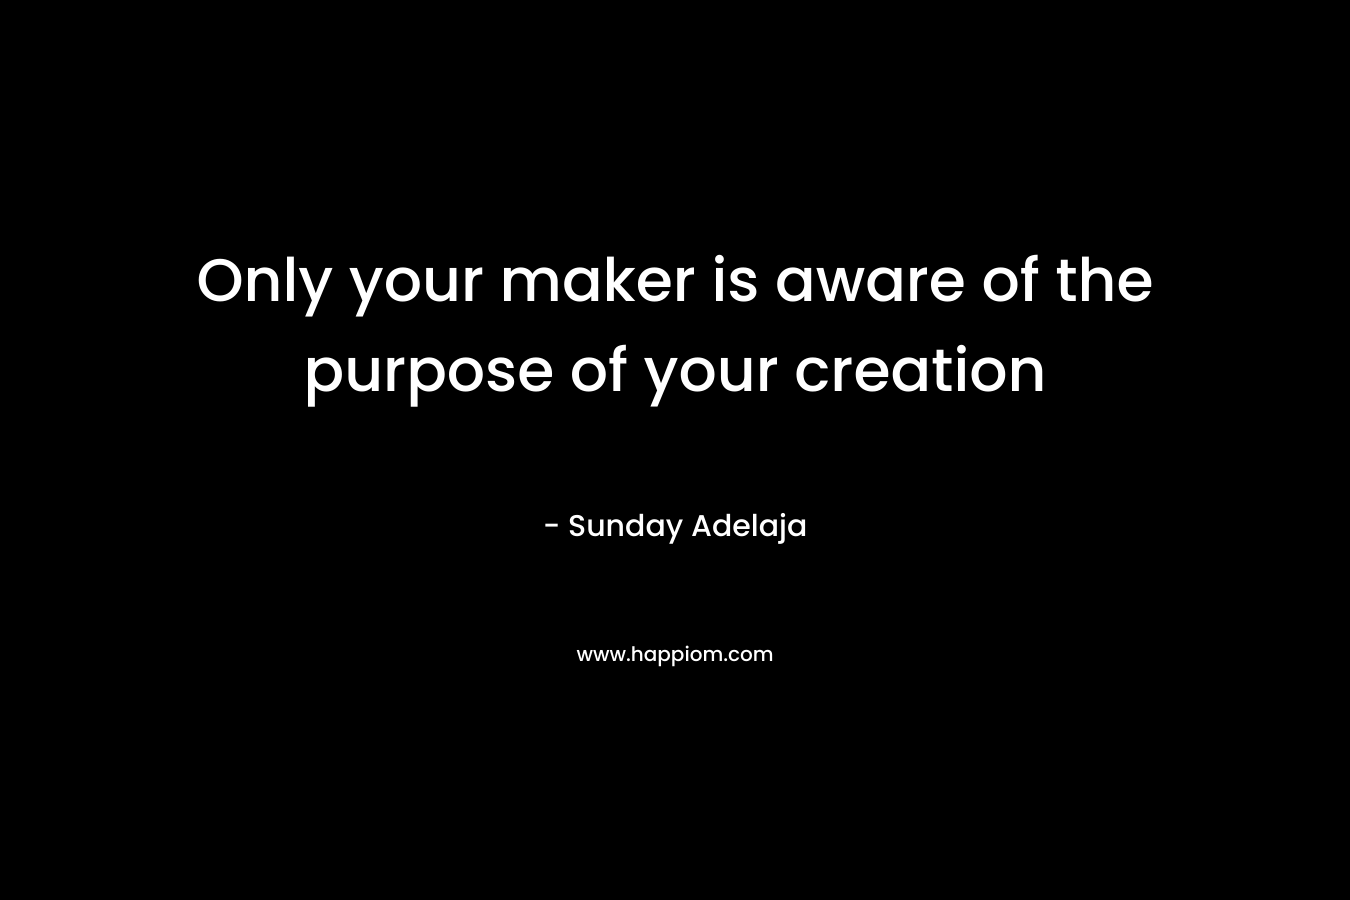 Only your maker is aware of the purpose of your creation